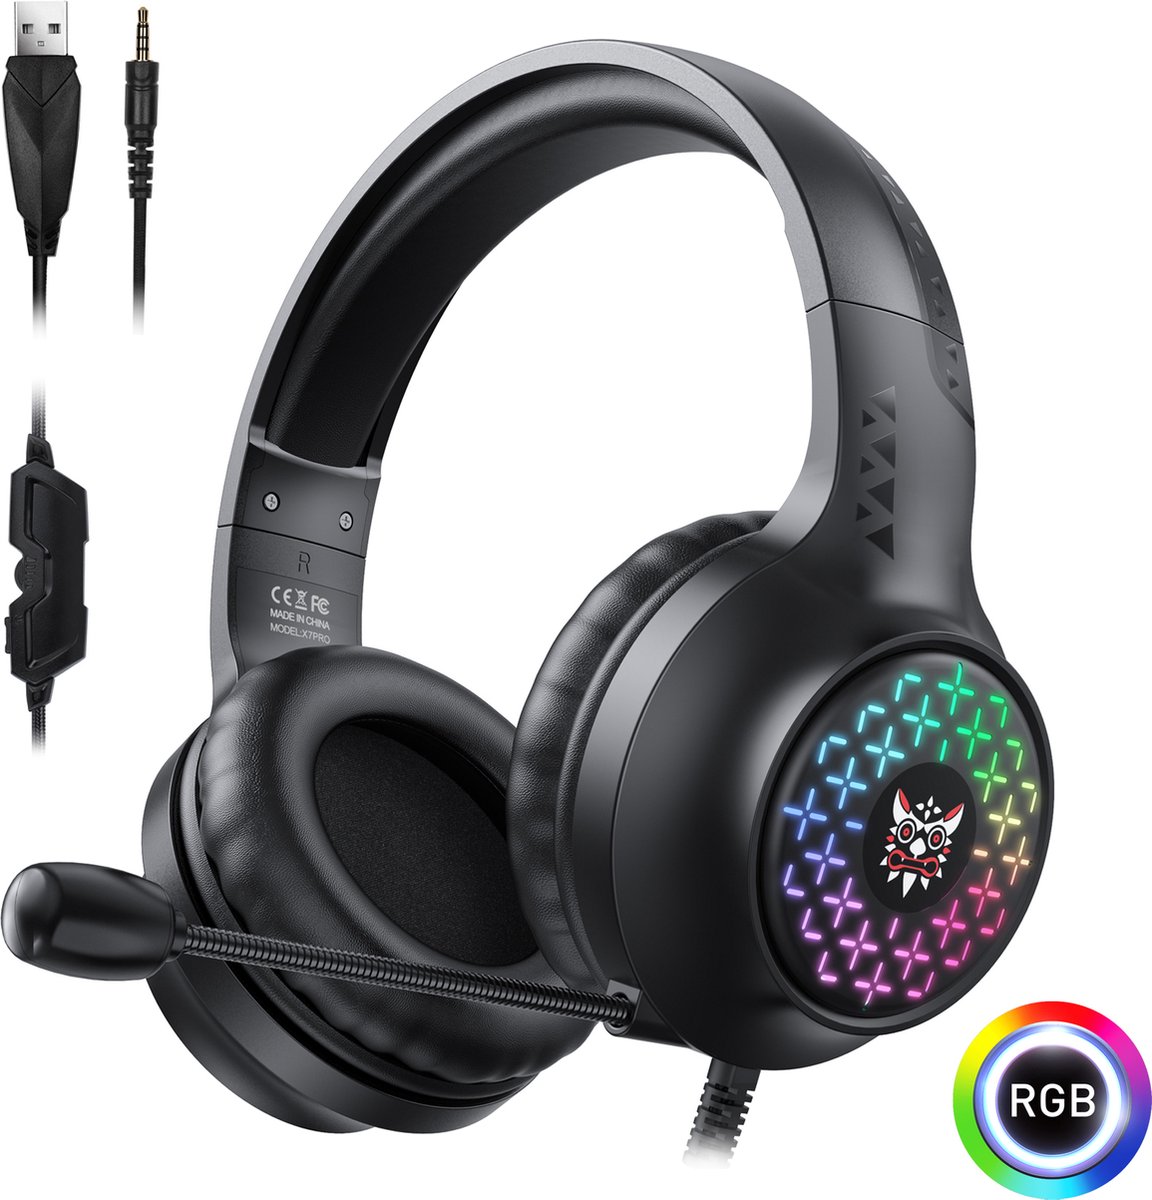 Gavury RGB X7 PRO Koptelefoon - RGB led verlichting - Voor PS4 PS5 en XBOX One Gaming Hoofdtelefoon - Professionele Gaming Headset - Surround Sound & Noise cancelling headset